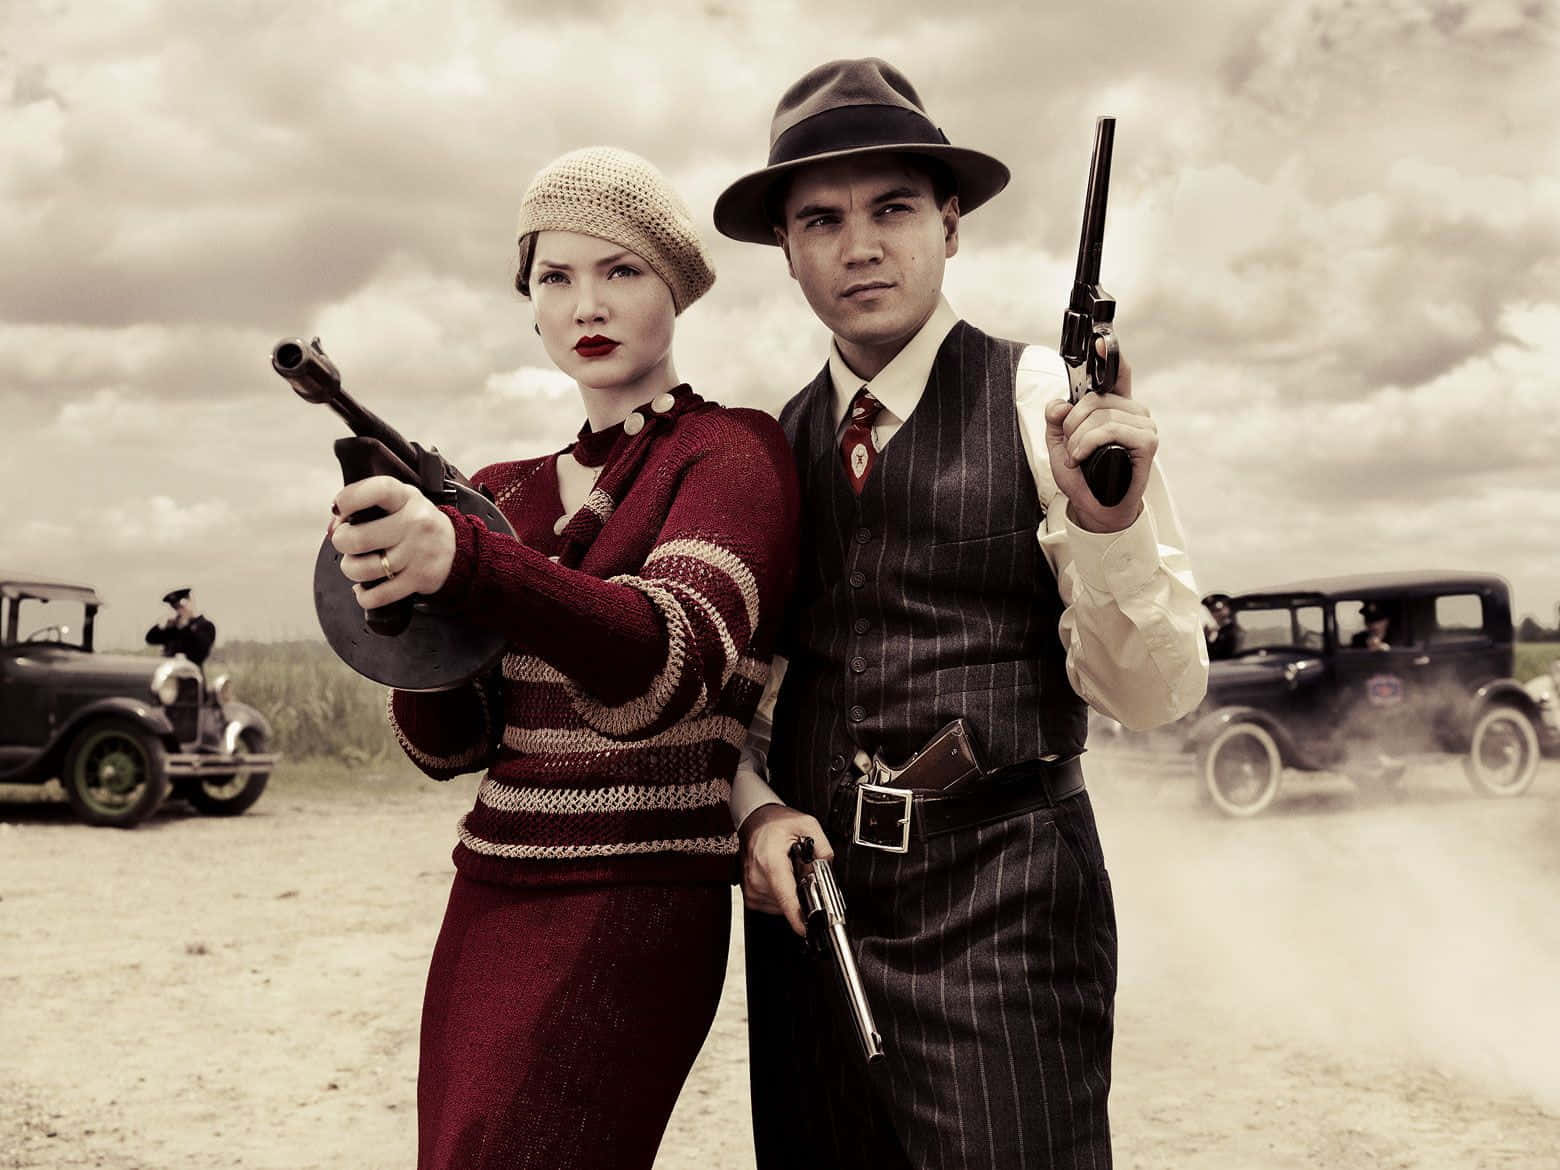 A Man And Woman In Vintage Clothing Holding Guns